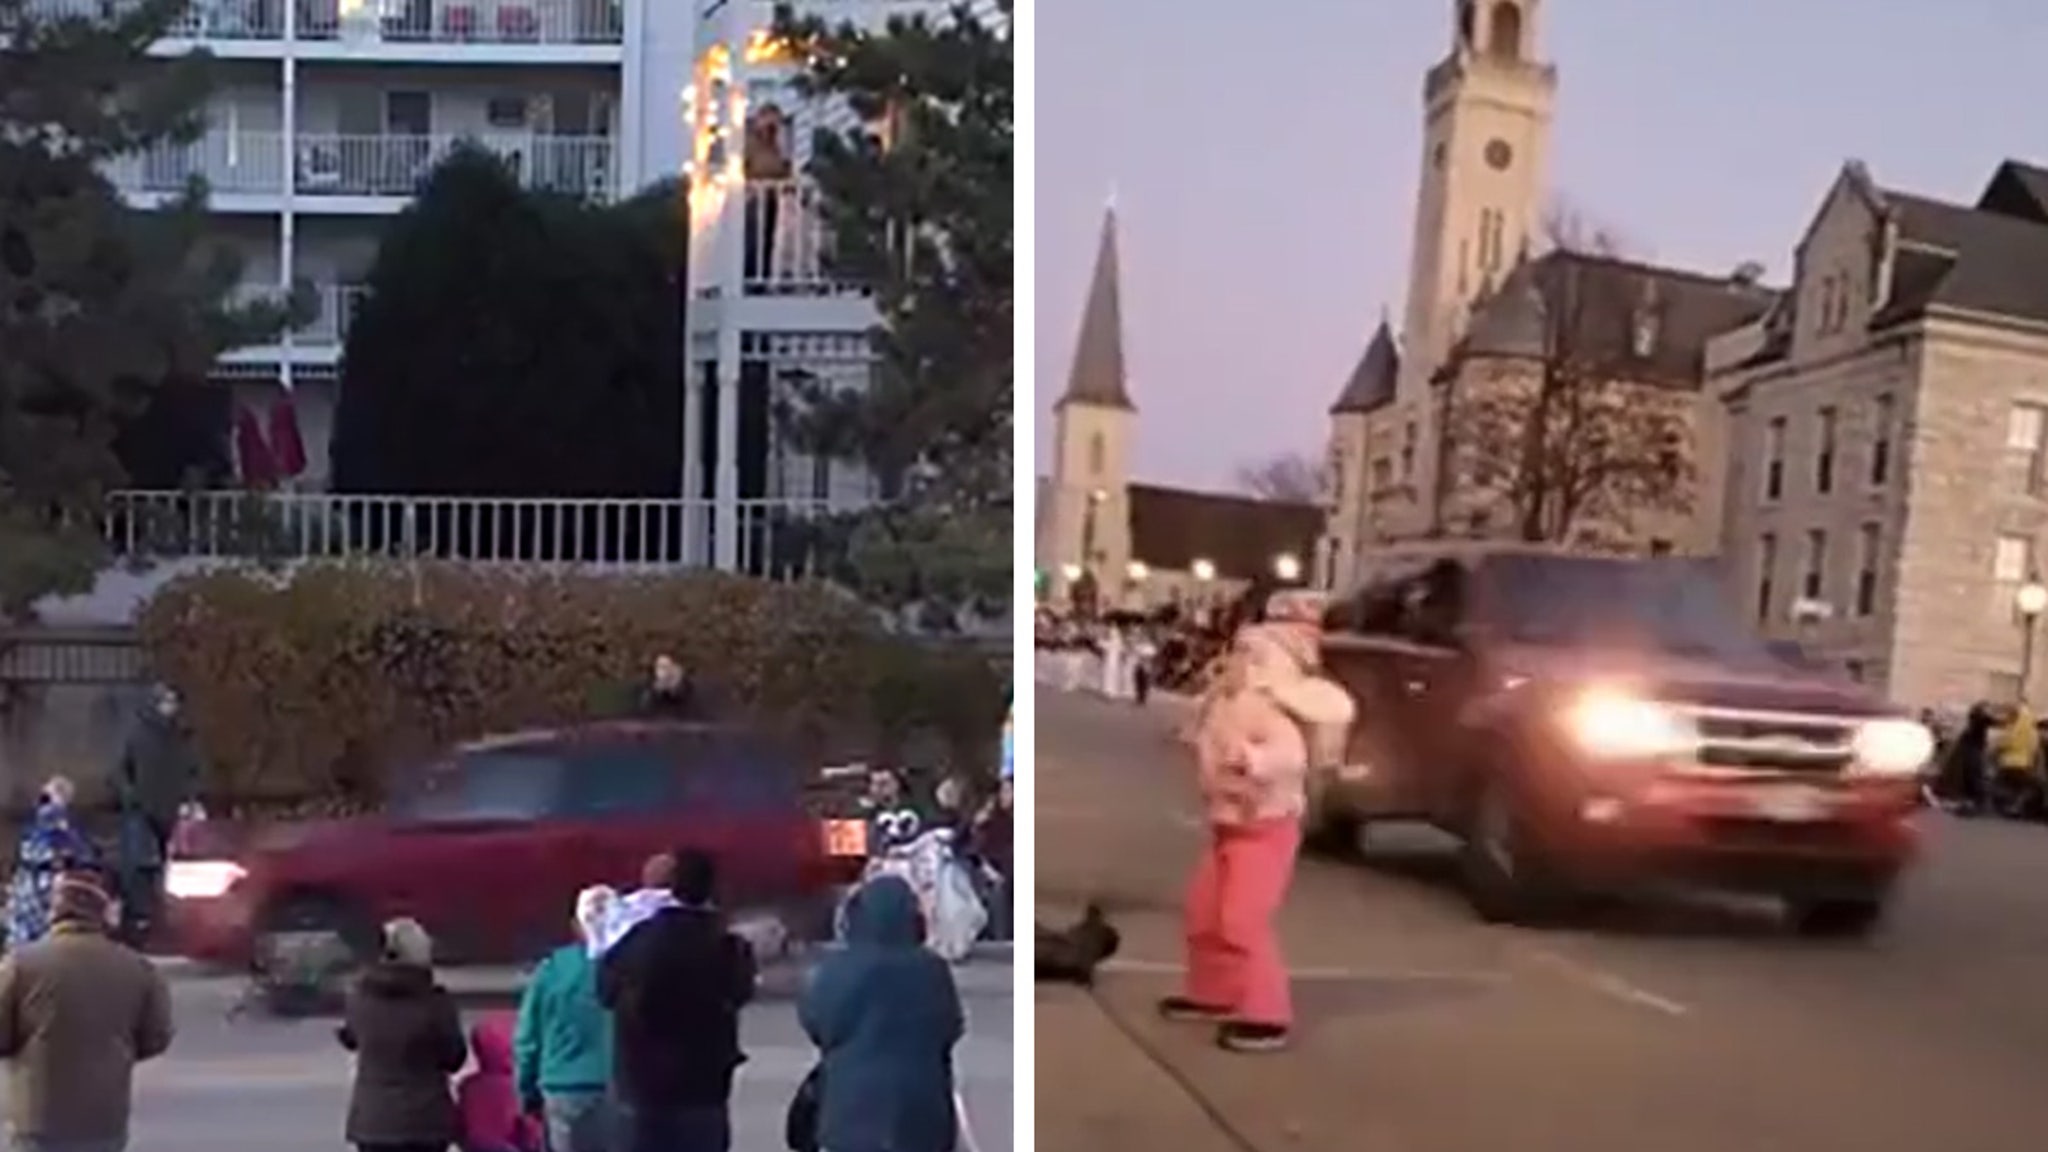 Red SUV Plows Into Parade in Wisconsin, Shots Fired &amp; Crowd Evacuated